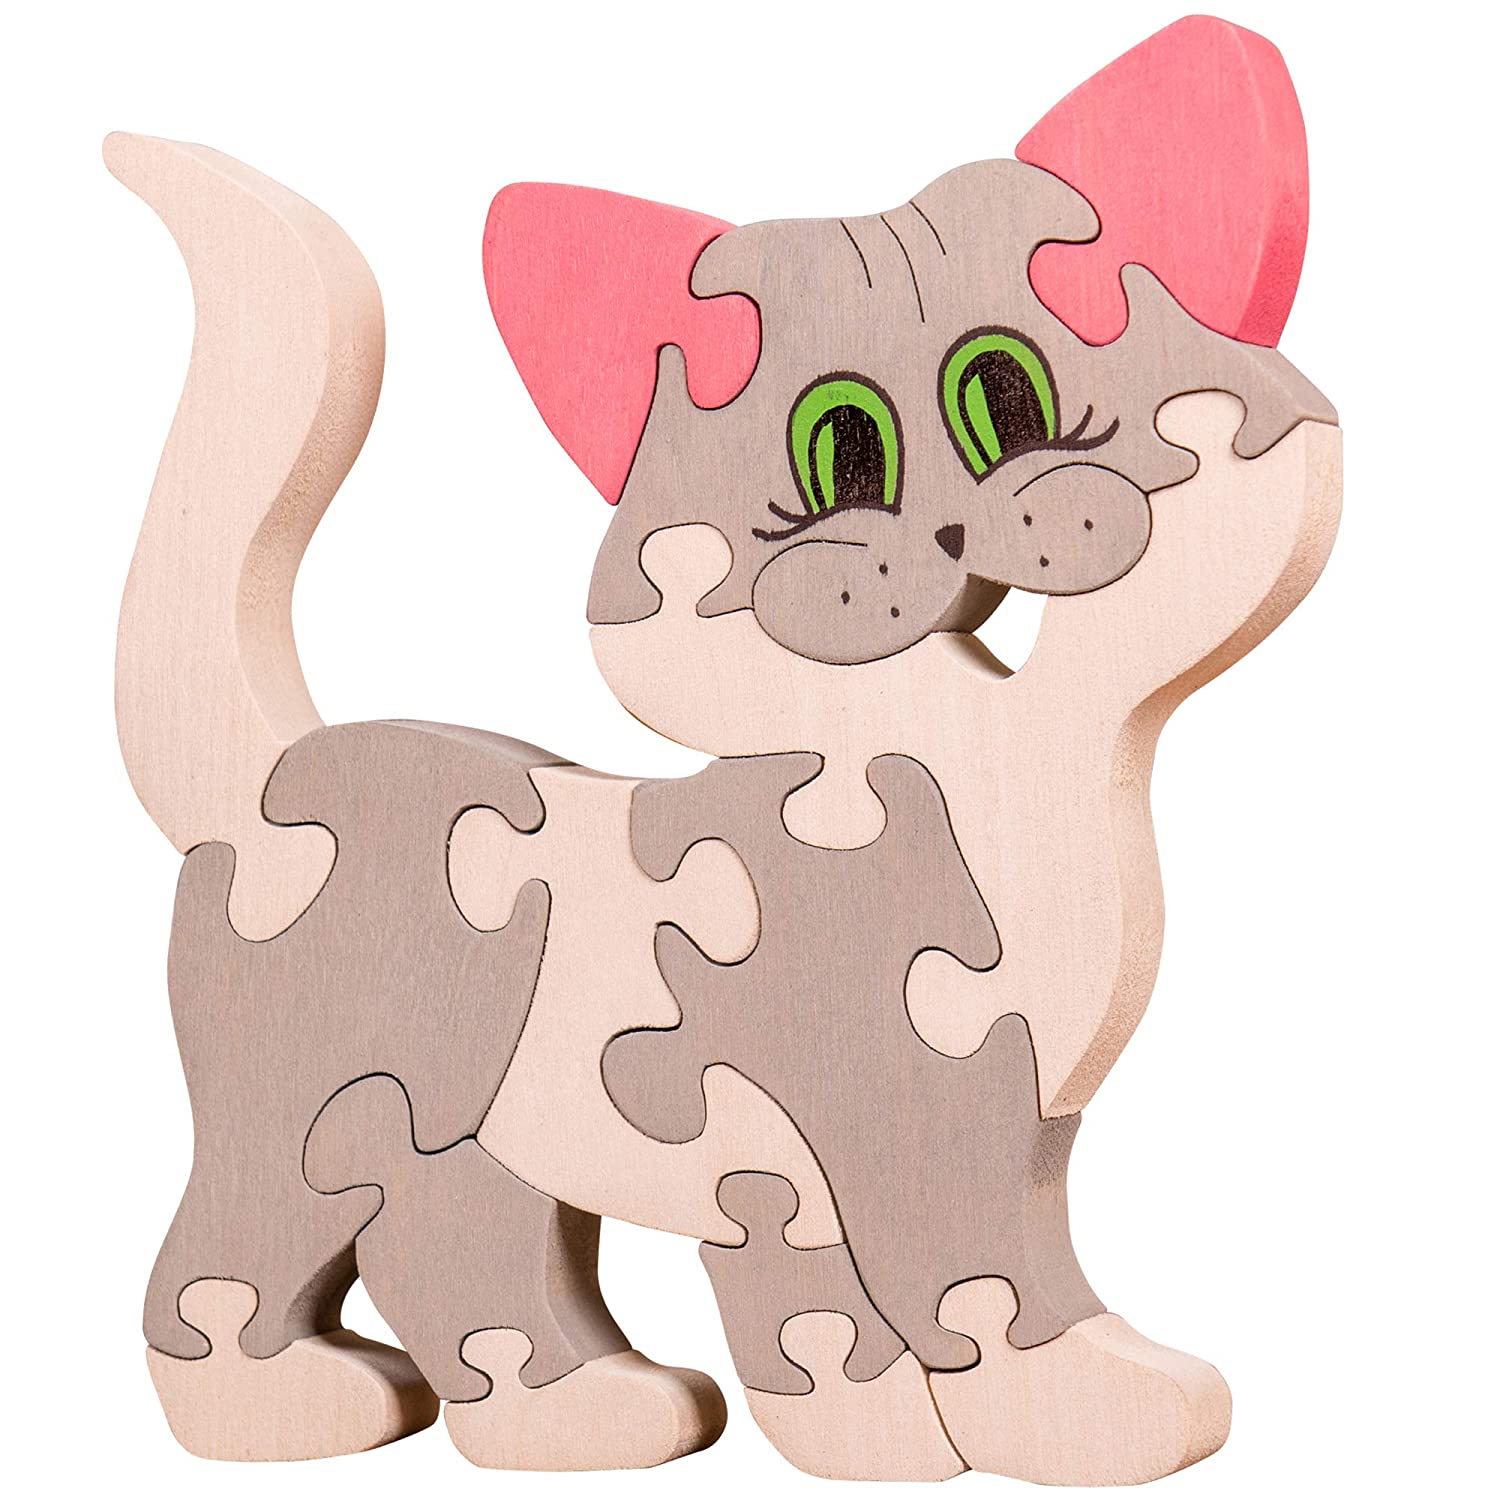 OXEMIZE Wooden Jigsaw Puzzles Cat for Toddlers 2 3 4 5 Years Old Educational Toys Baby Kids Gift